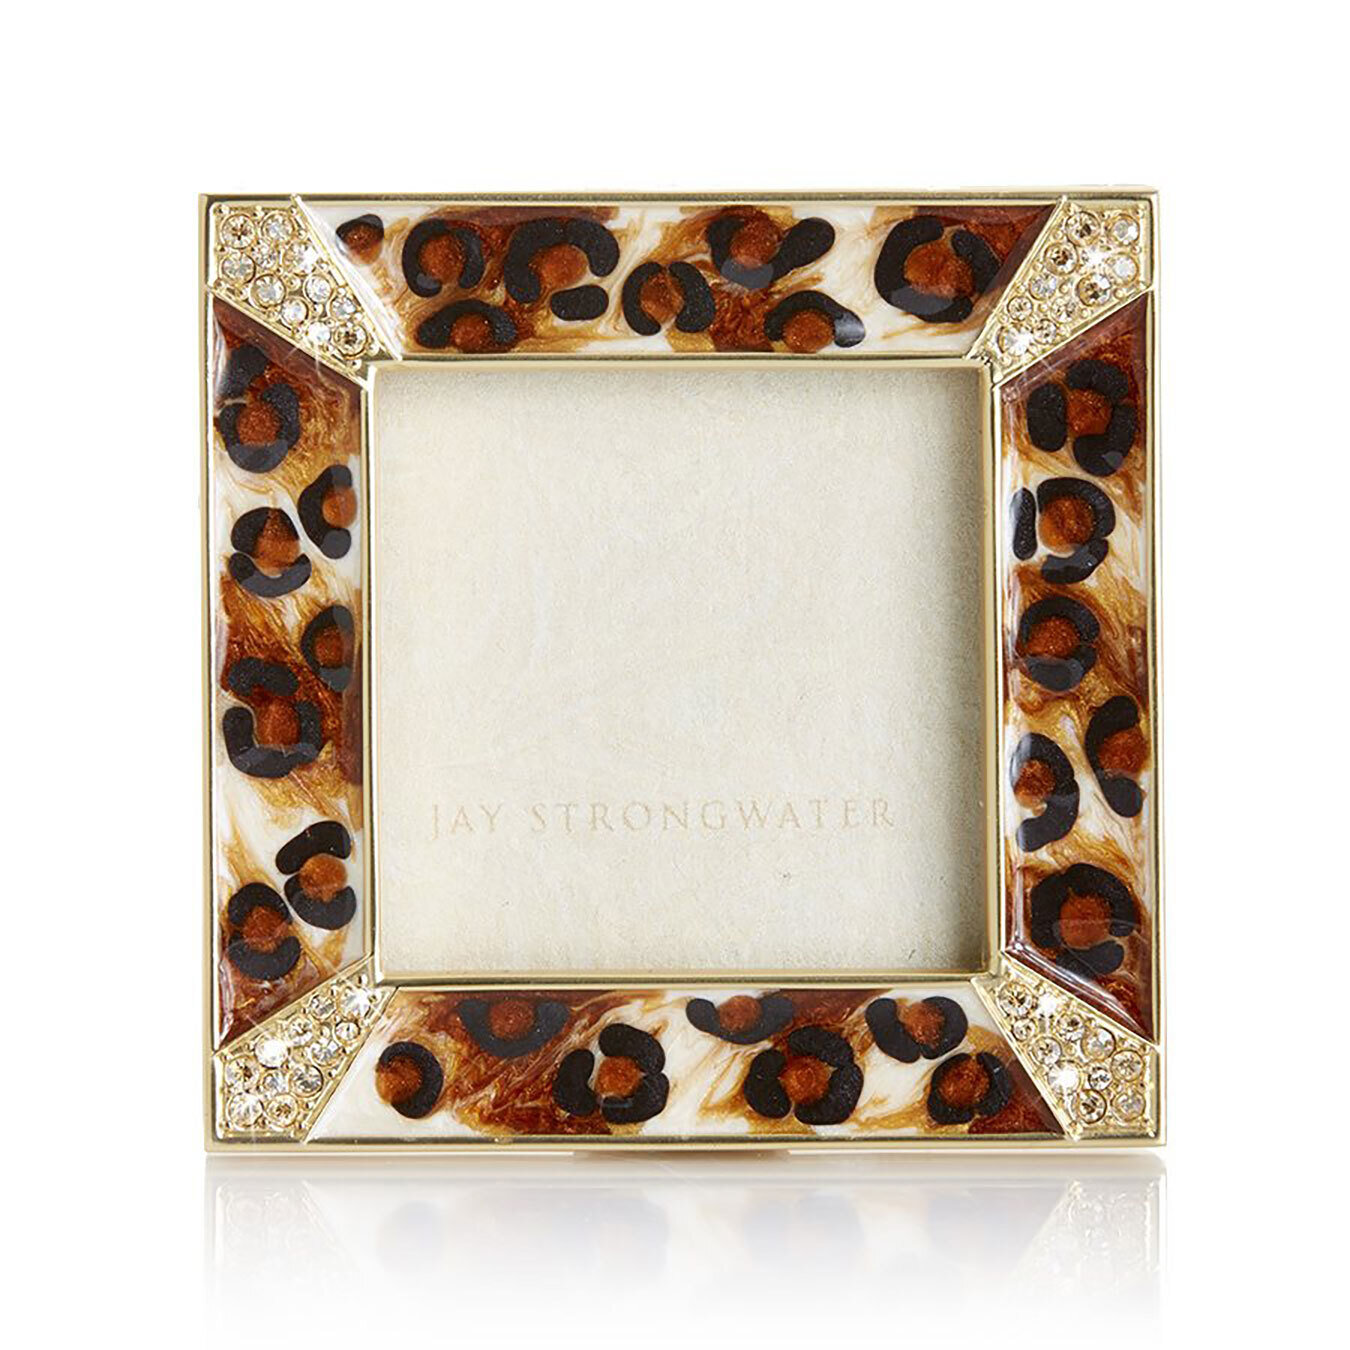 Jay Strongwater Leopard Spotted Pave Corner 2" Square Picture Frame SPF5130-203